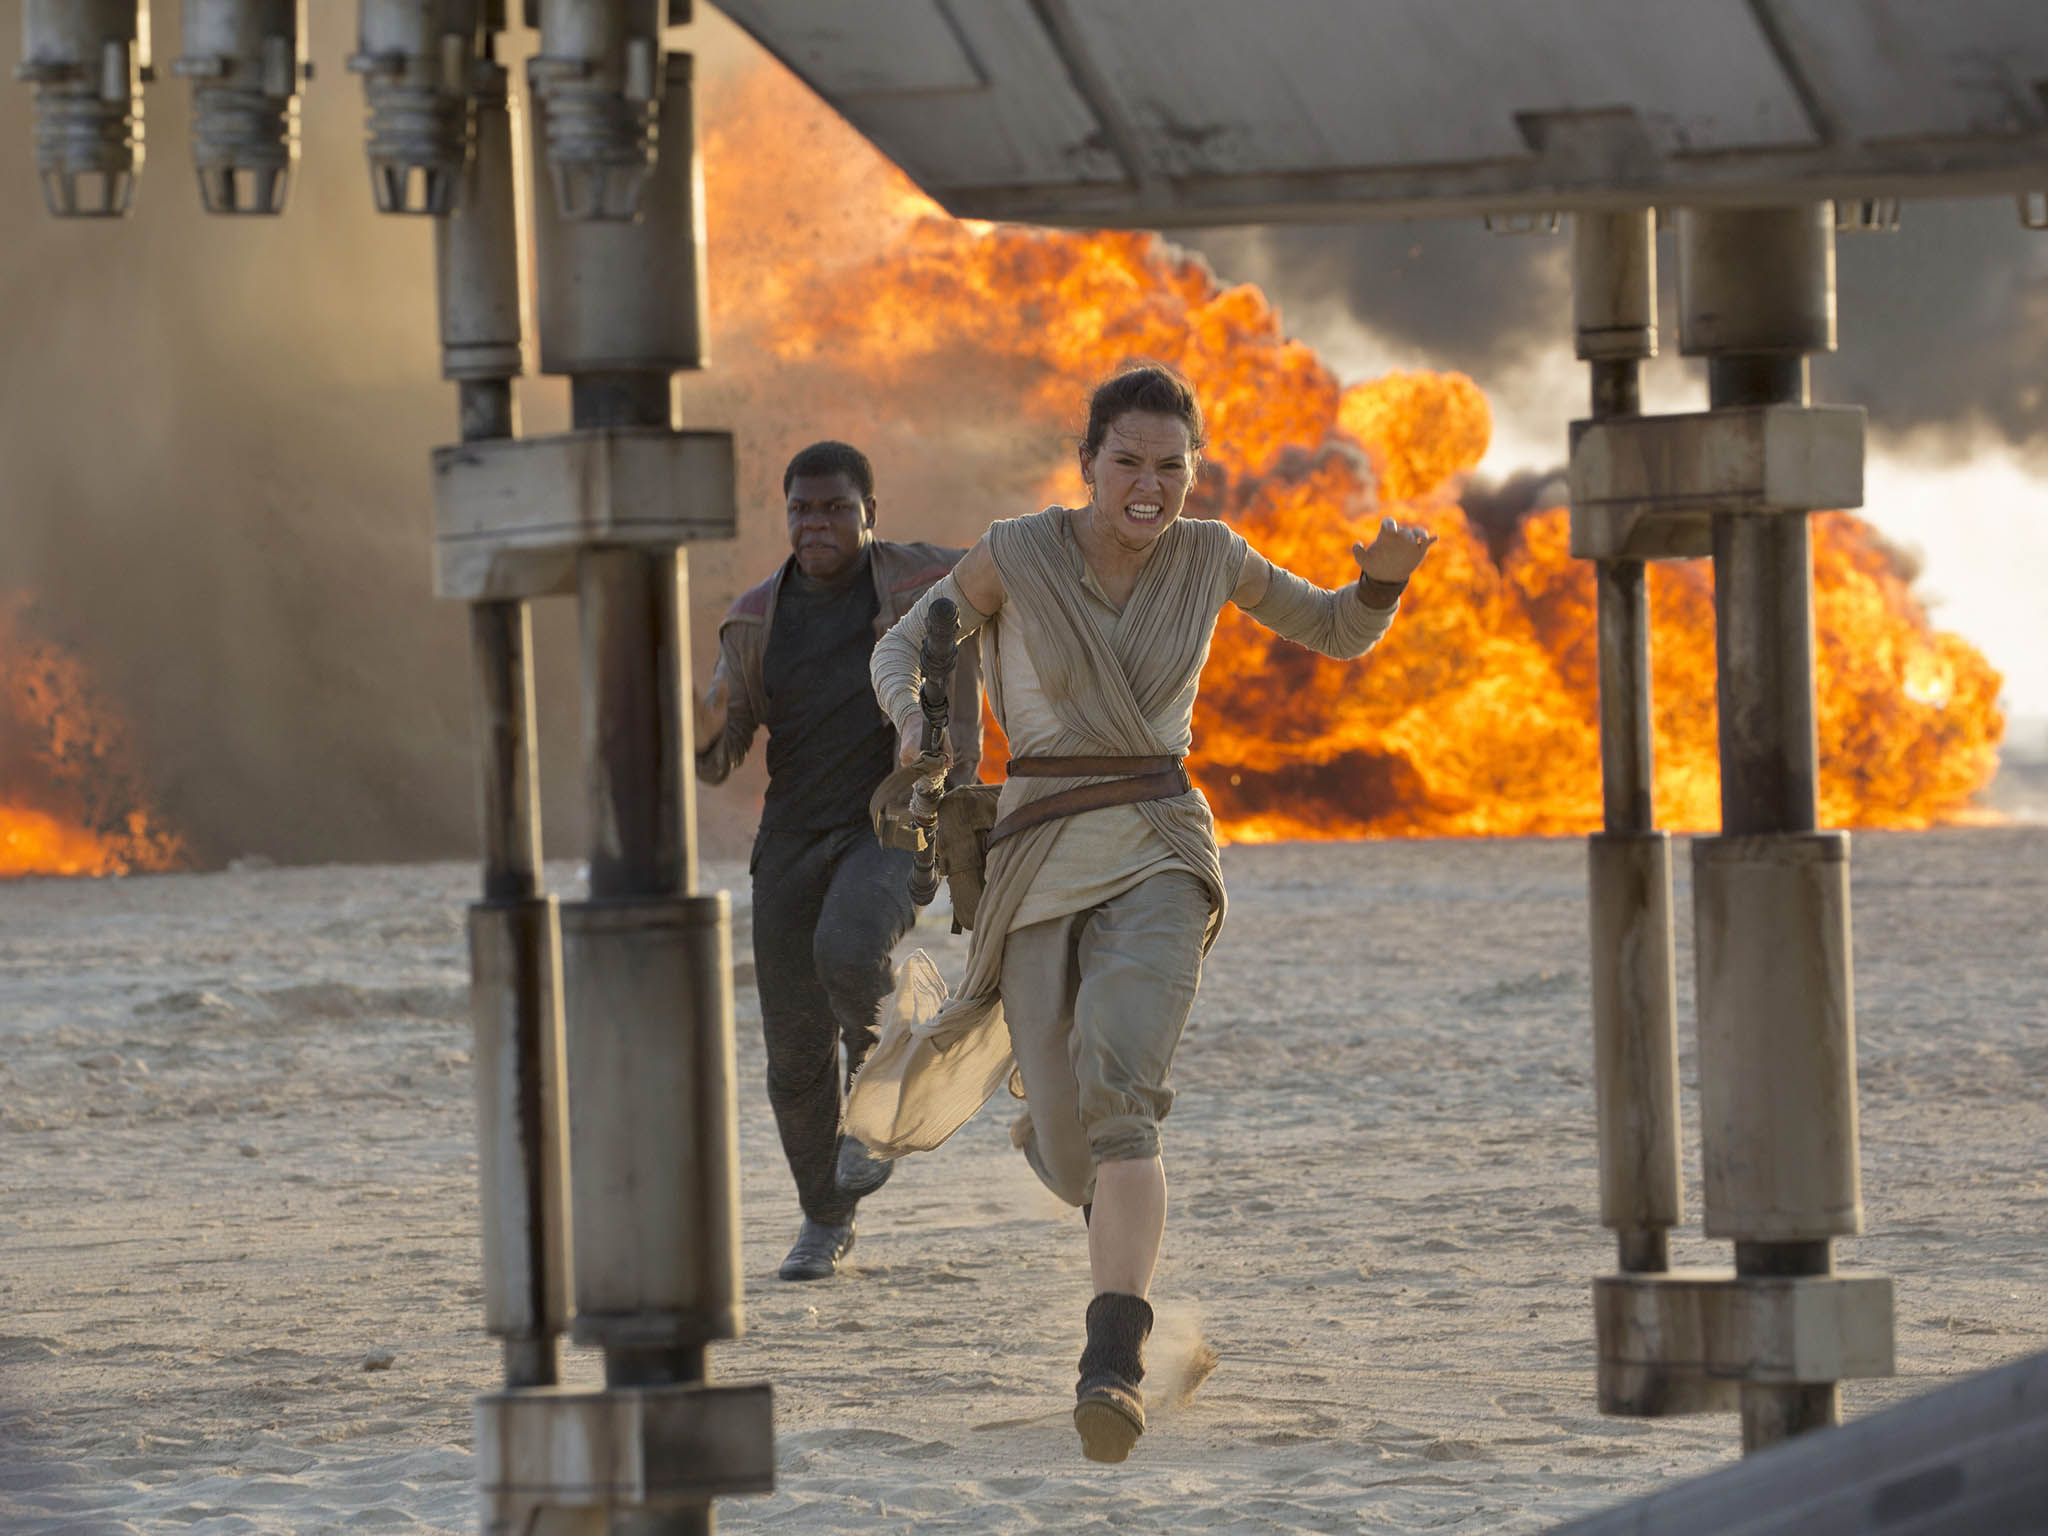 Daisy Ridley and John Boyega as Rey and Finn in Star Wars: The Force Awakens